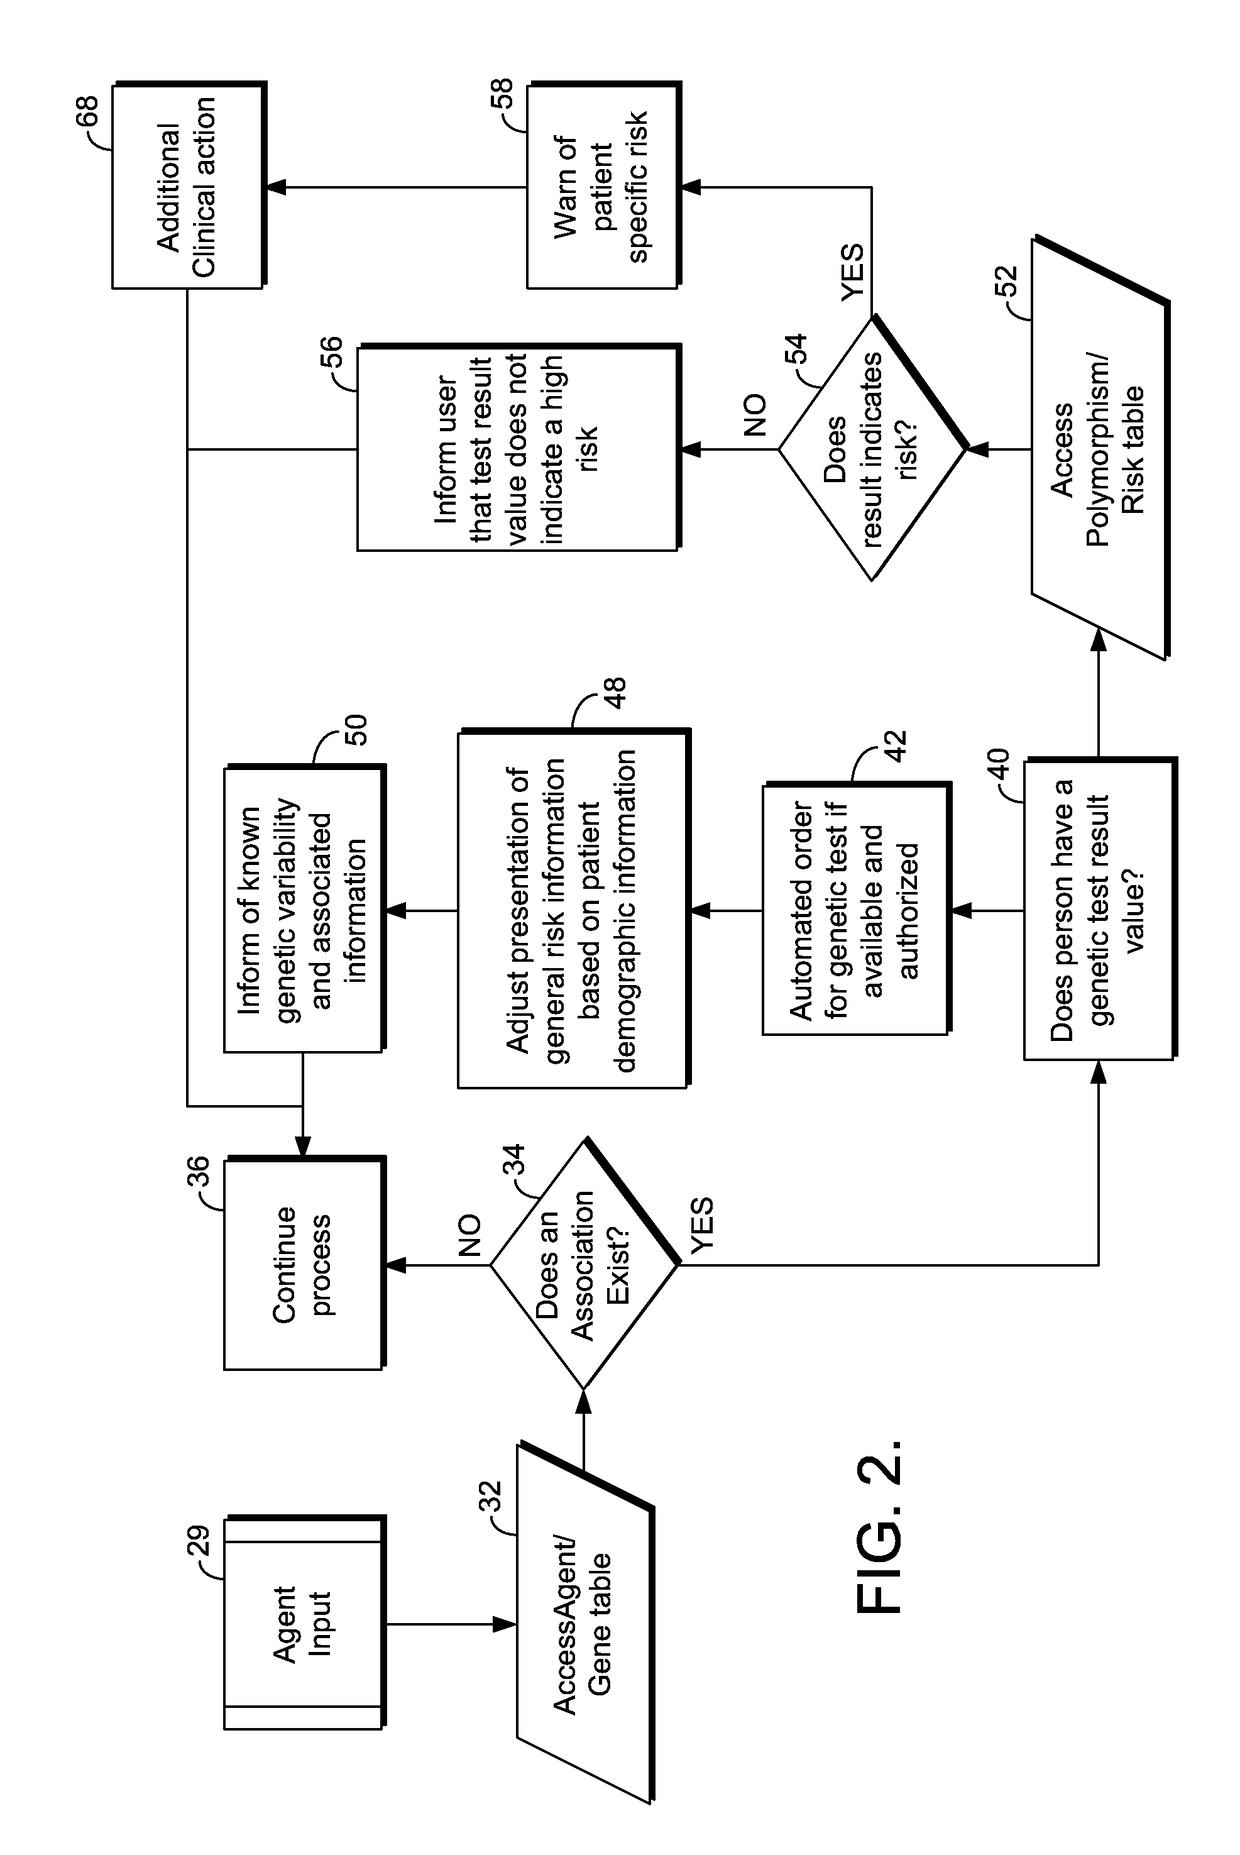 Computer System for Providing Information about the Risk of an Atypical Clinical Event Based Upon Genetic Information